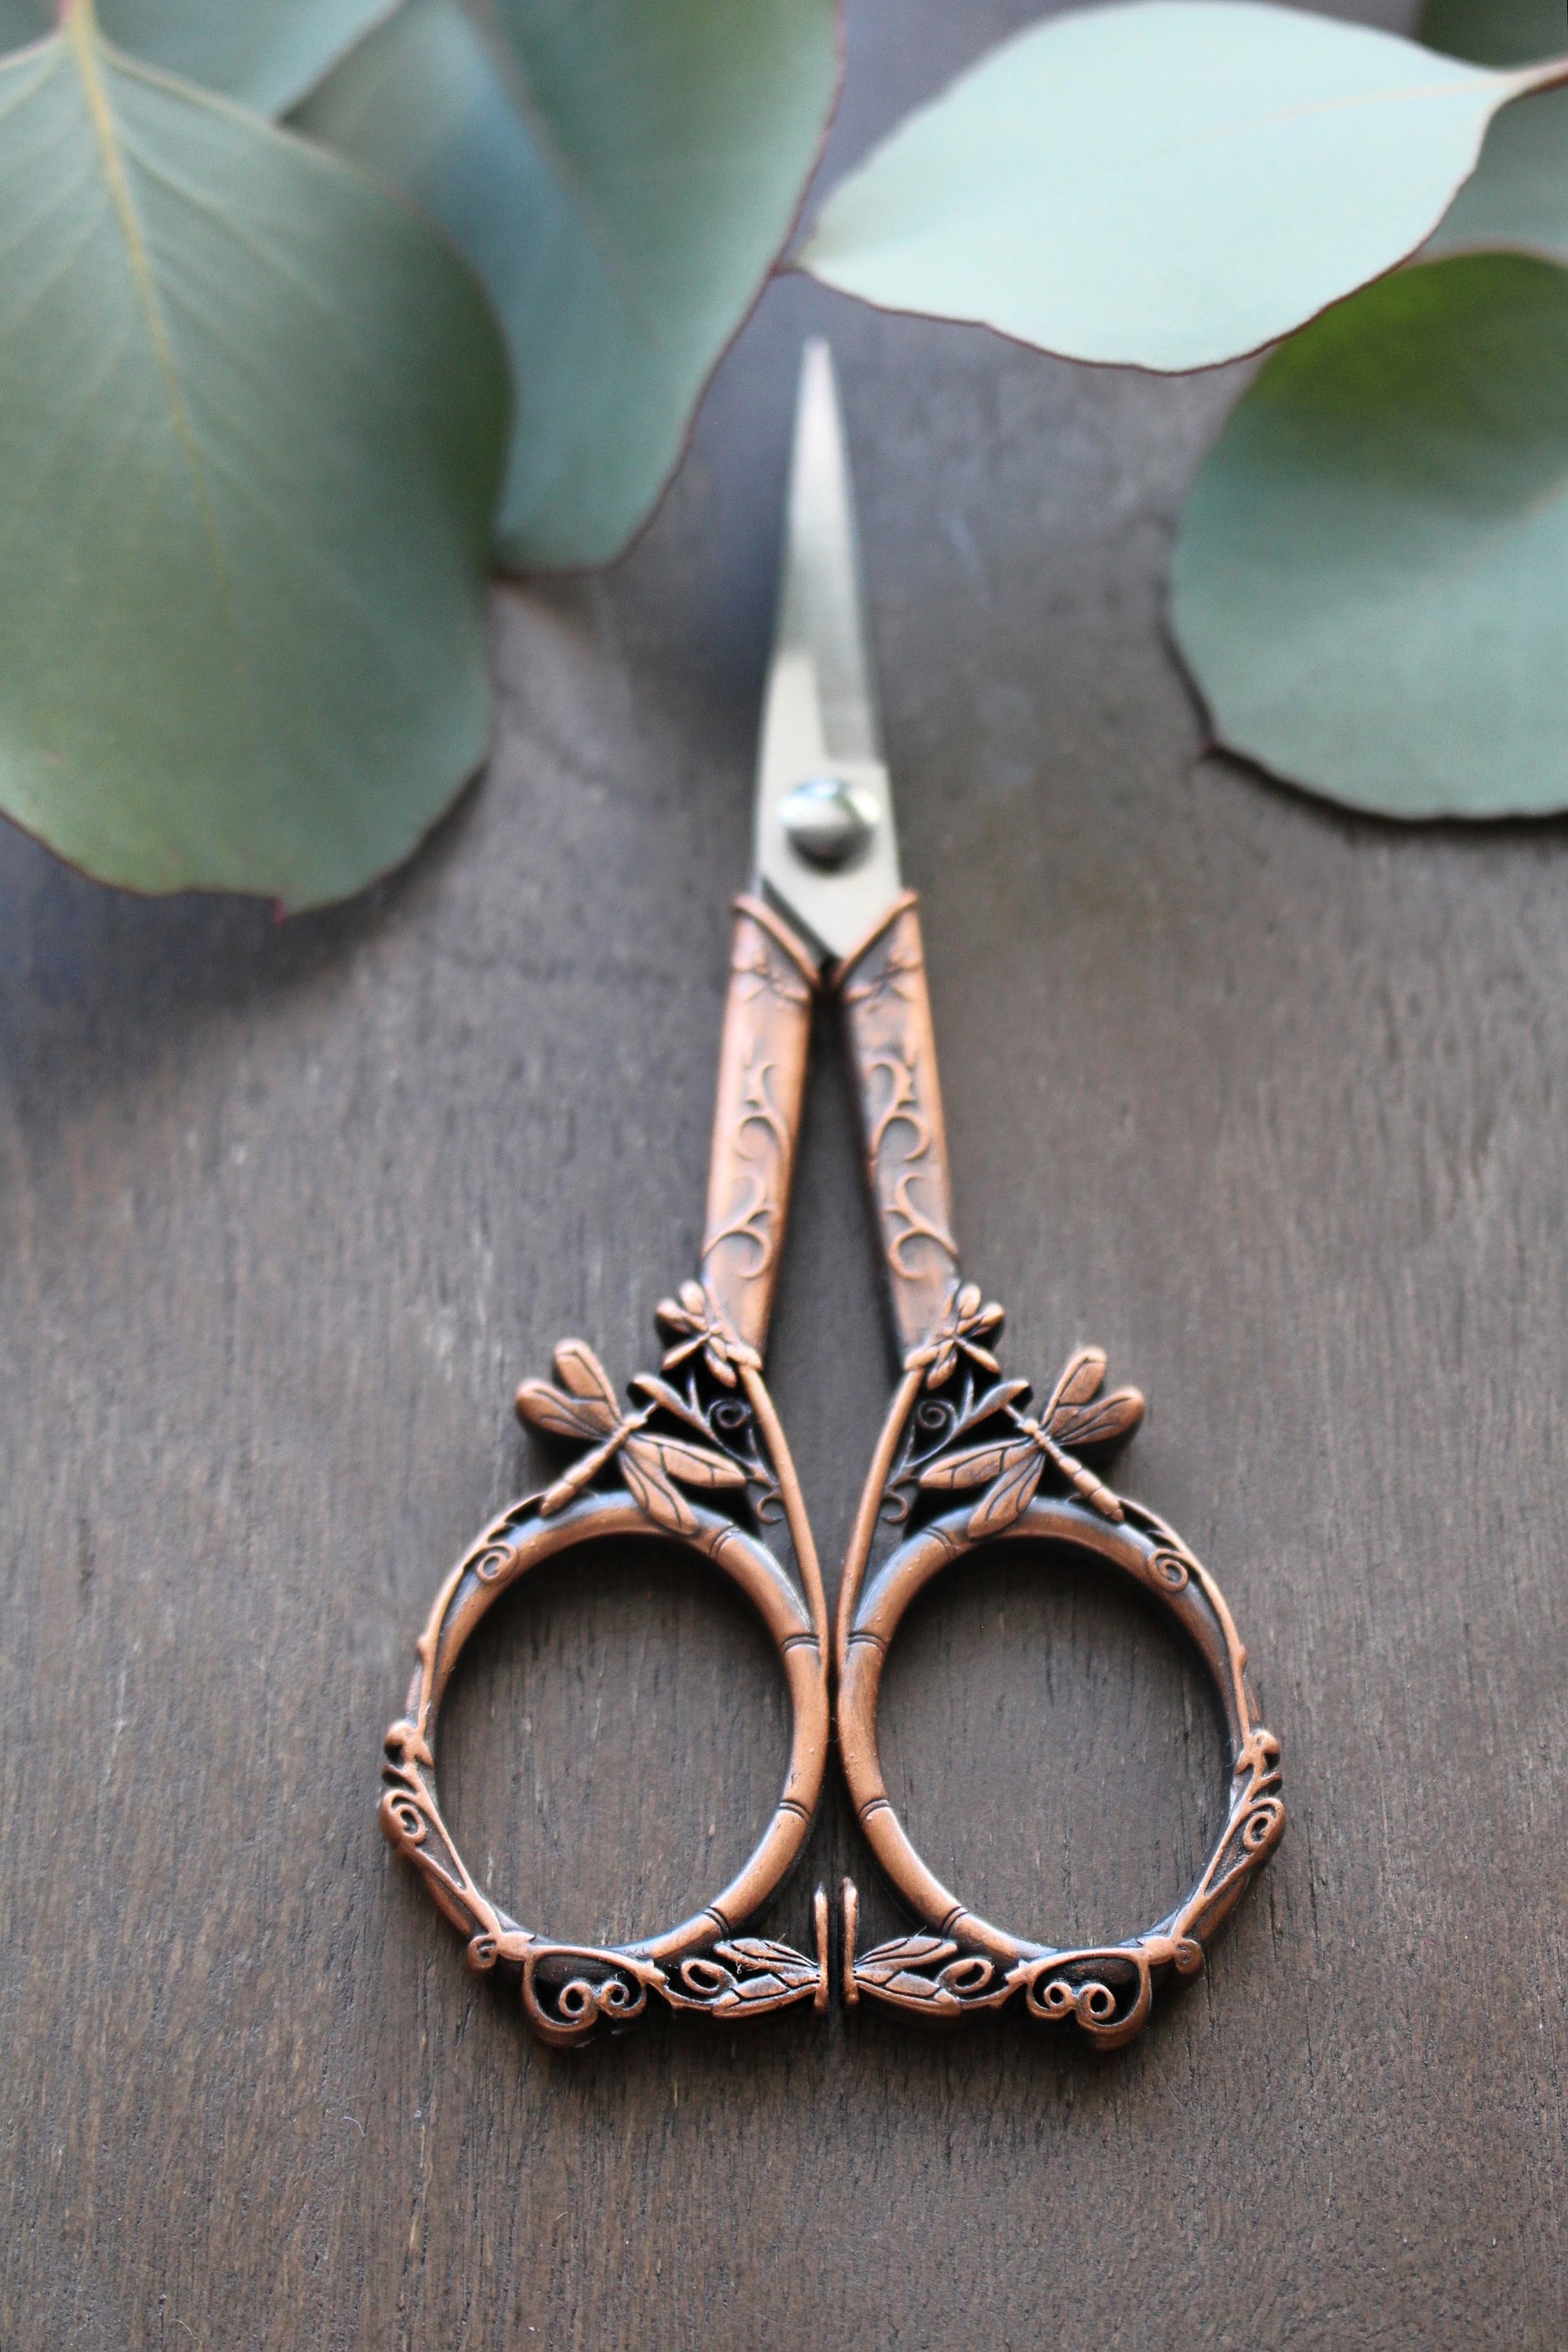 Dragonfly Embroidery Scissors Unique Garden Theme Quilting Scissors in  Vintage Copper or Silver Finish Quilting Gift or Embroidery Gift 